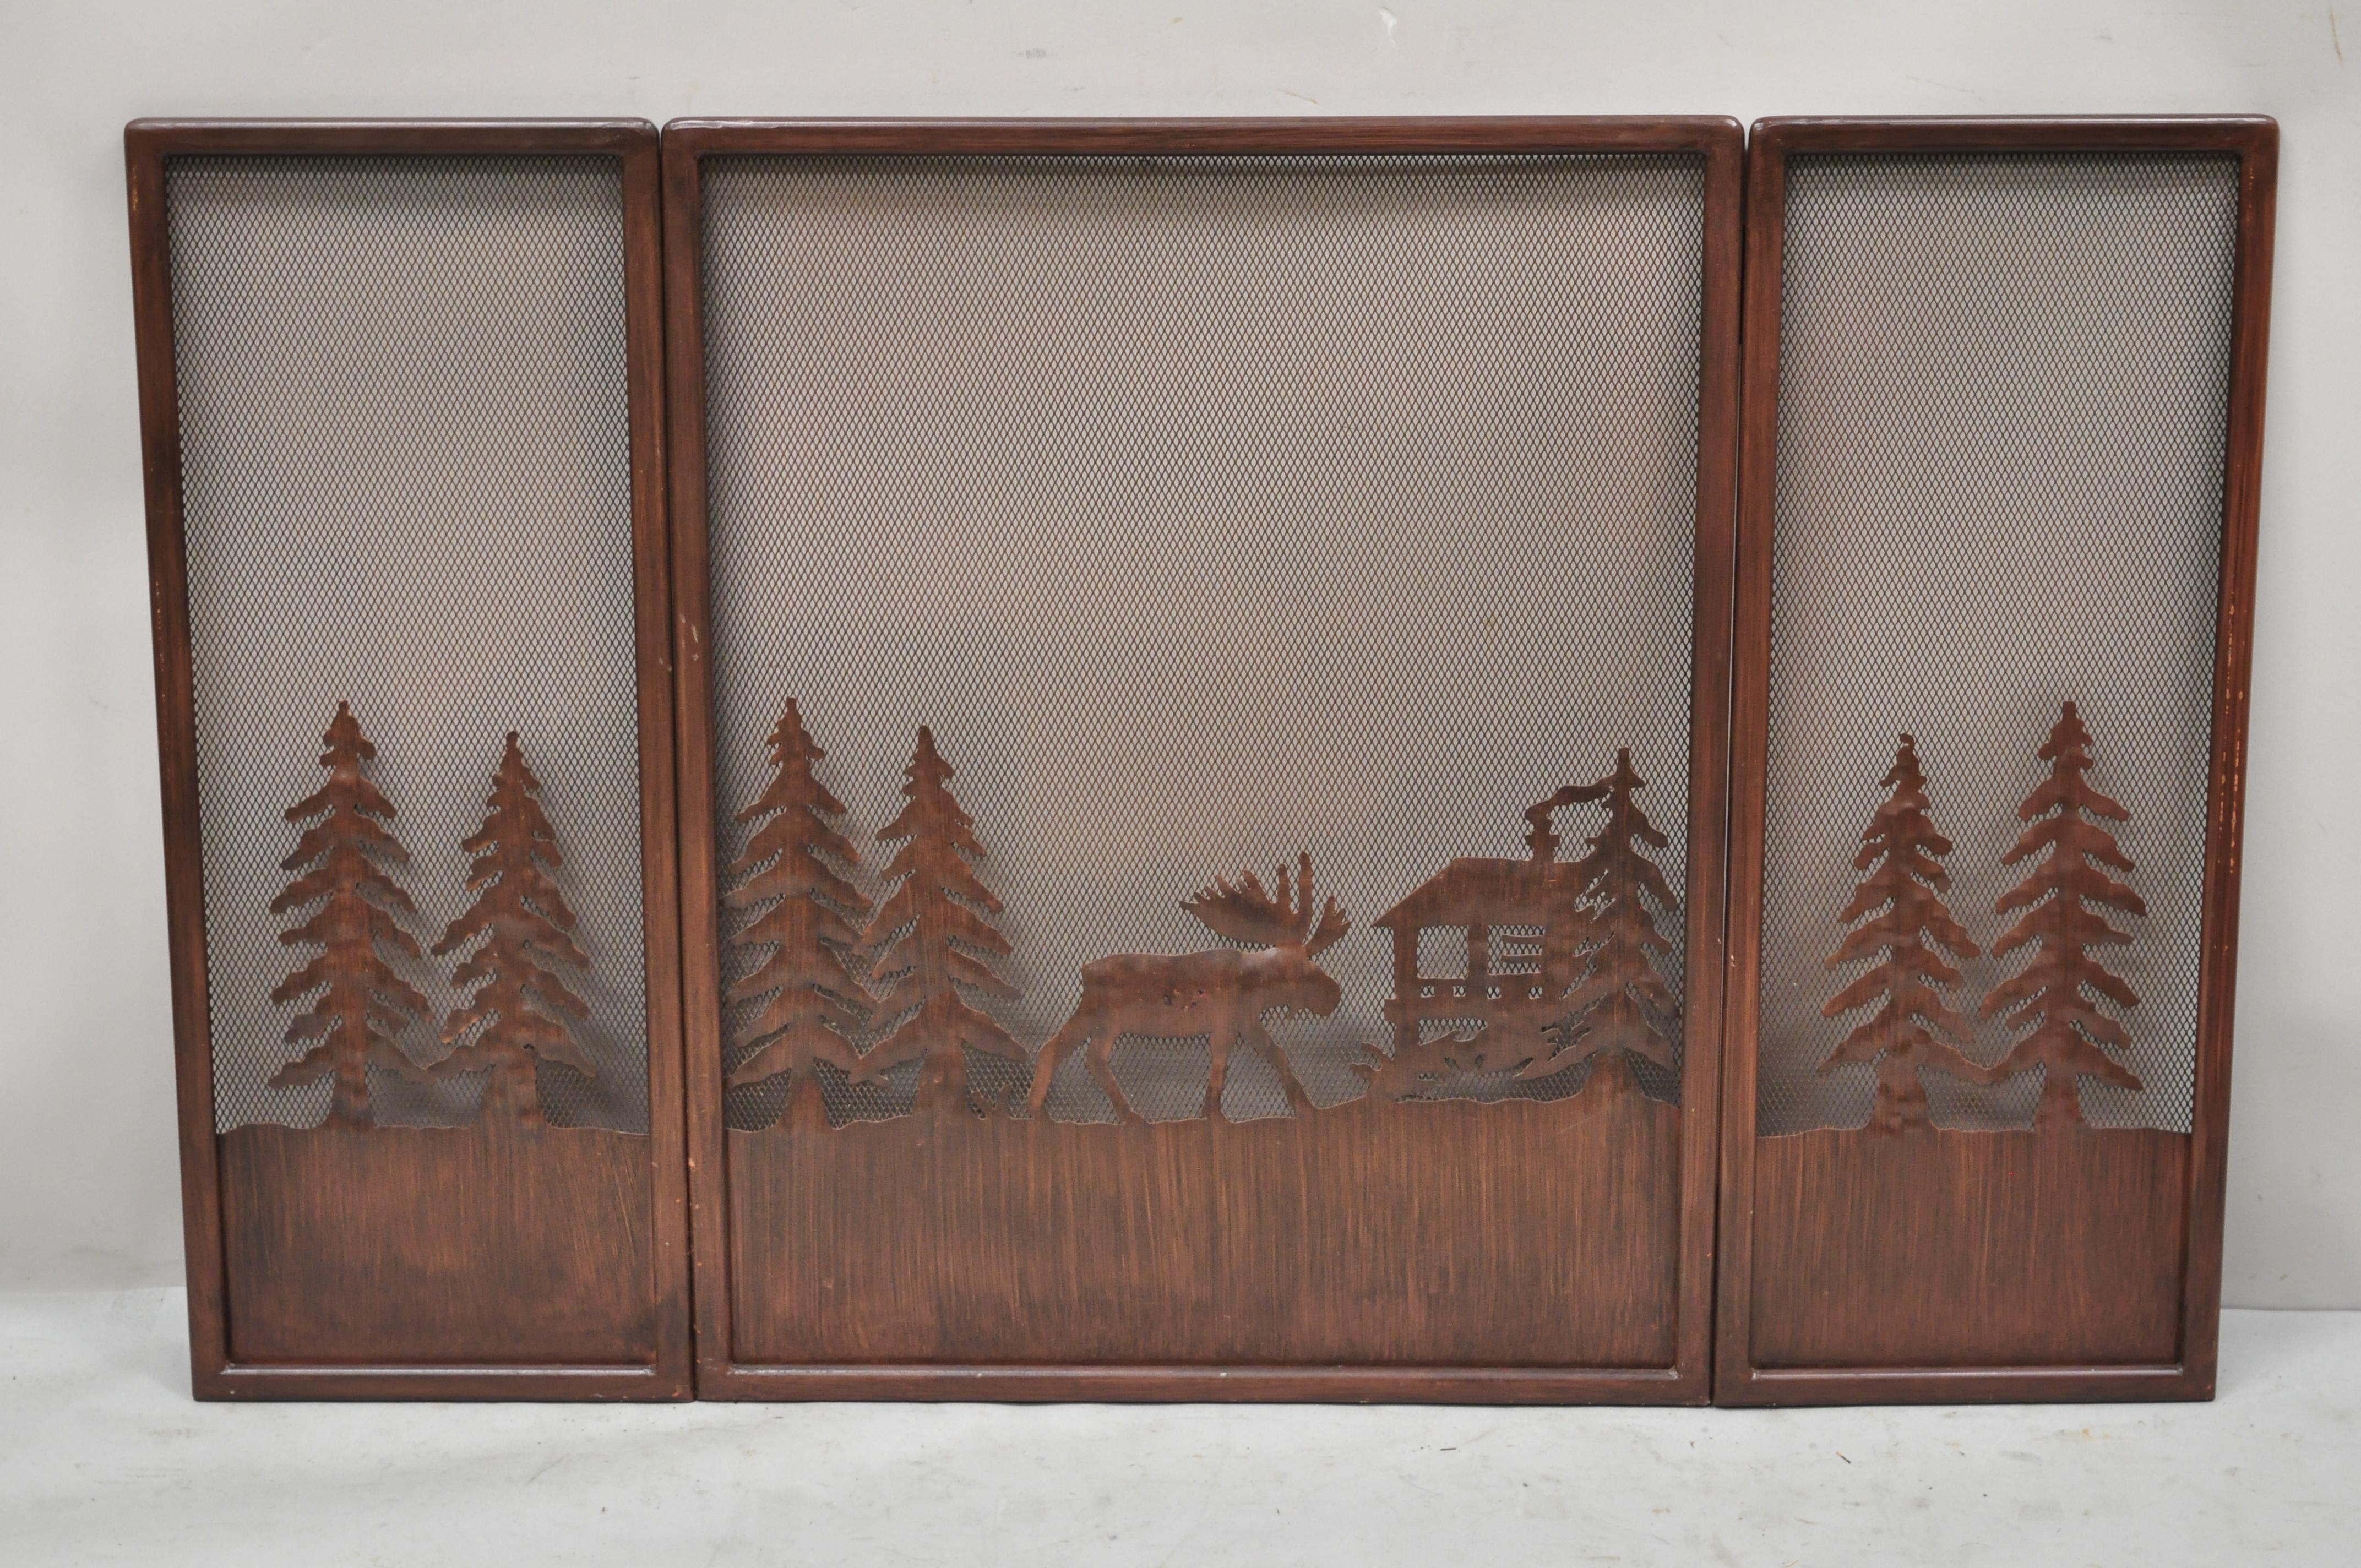 Moose Wilderness Log Cabin Rustic Iron Folding Fireplace Mantle Screen In Good Condition For Sale In Philadelphia, PA